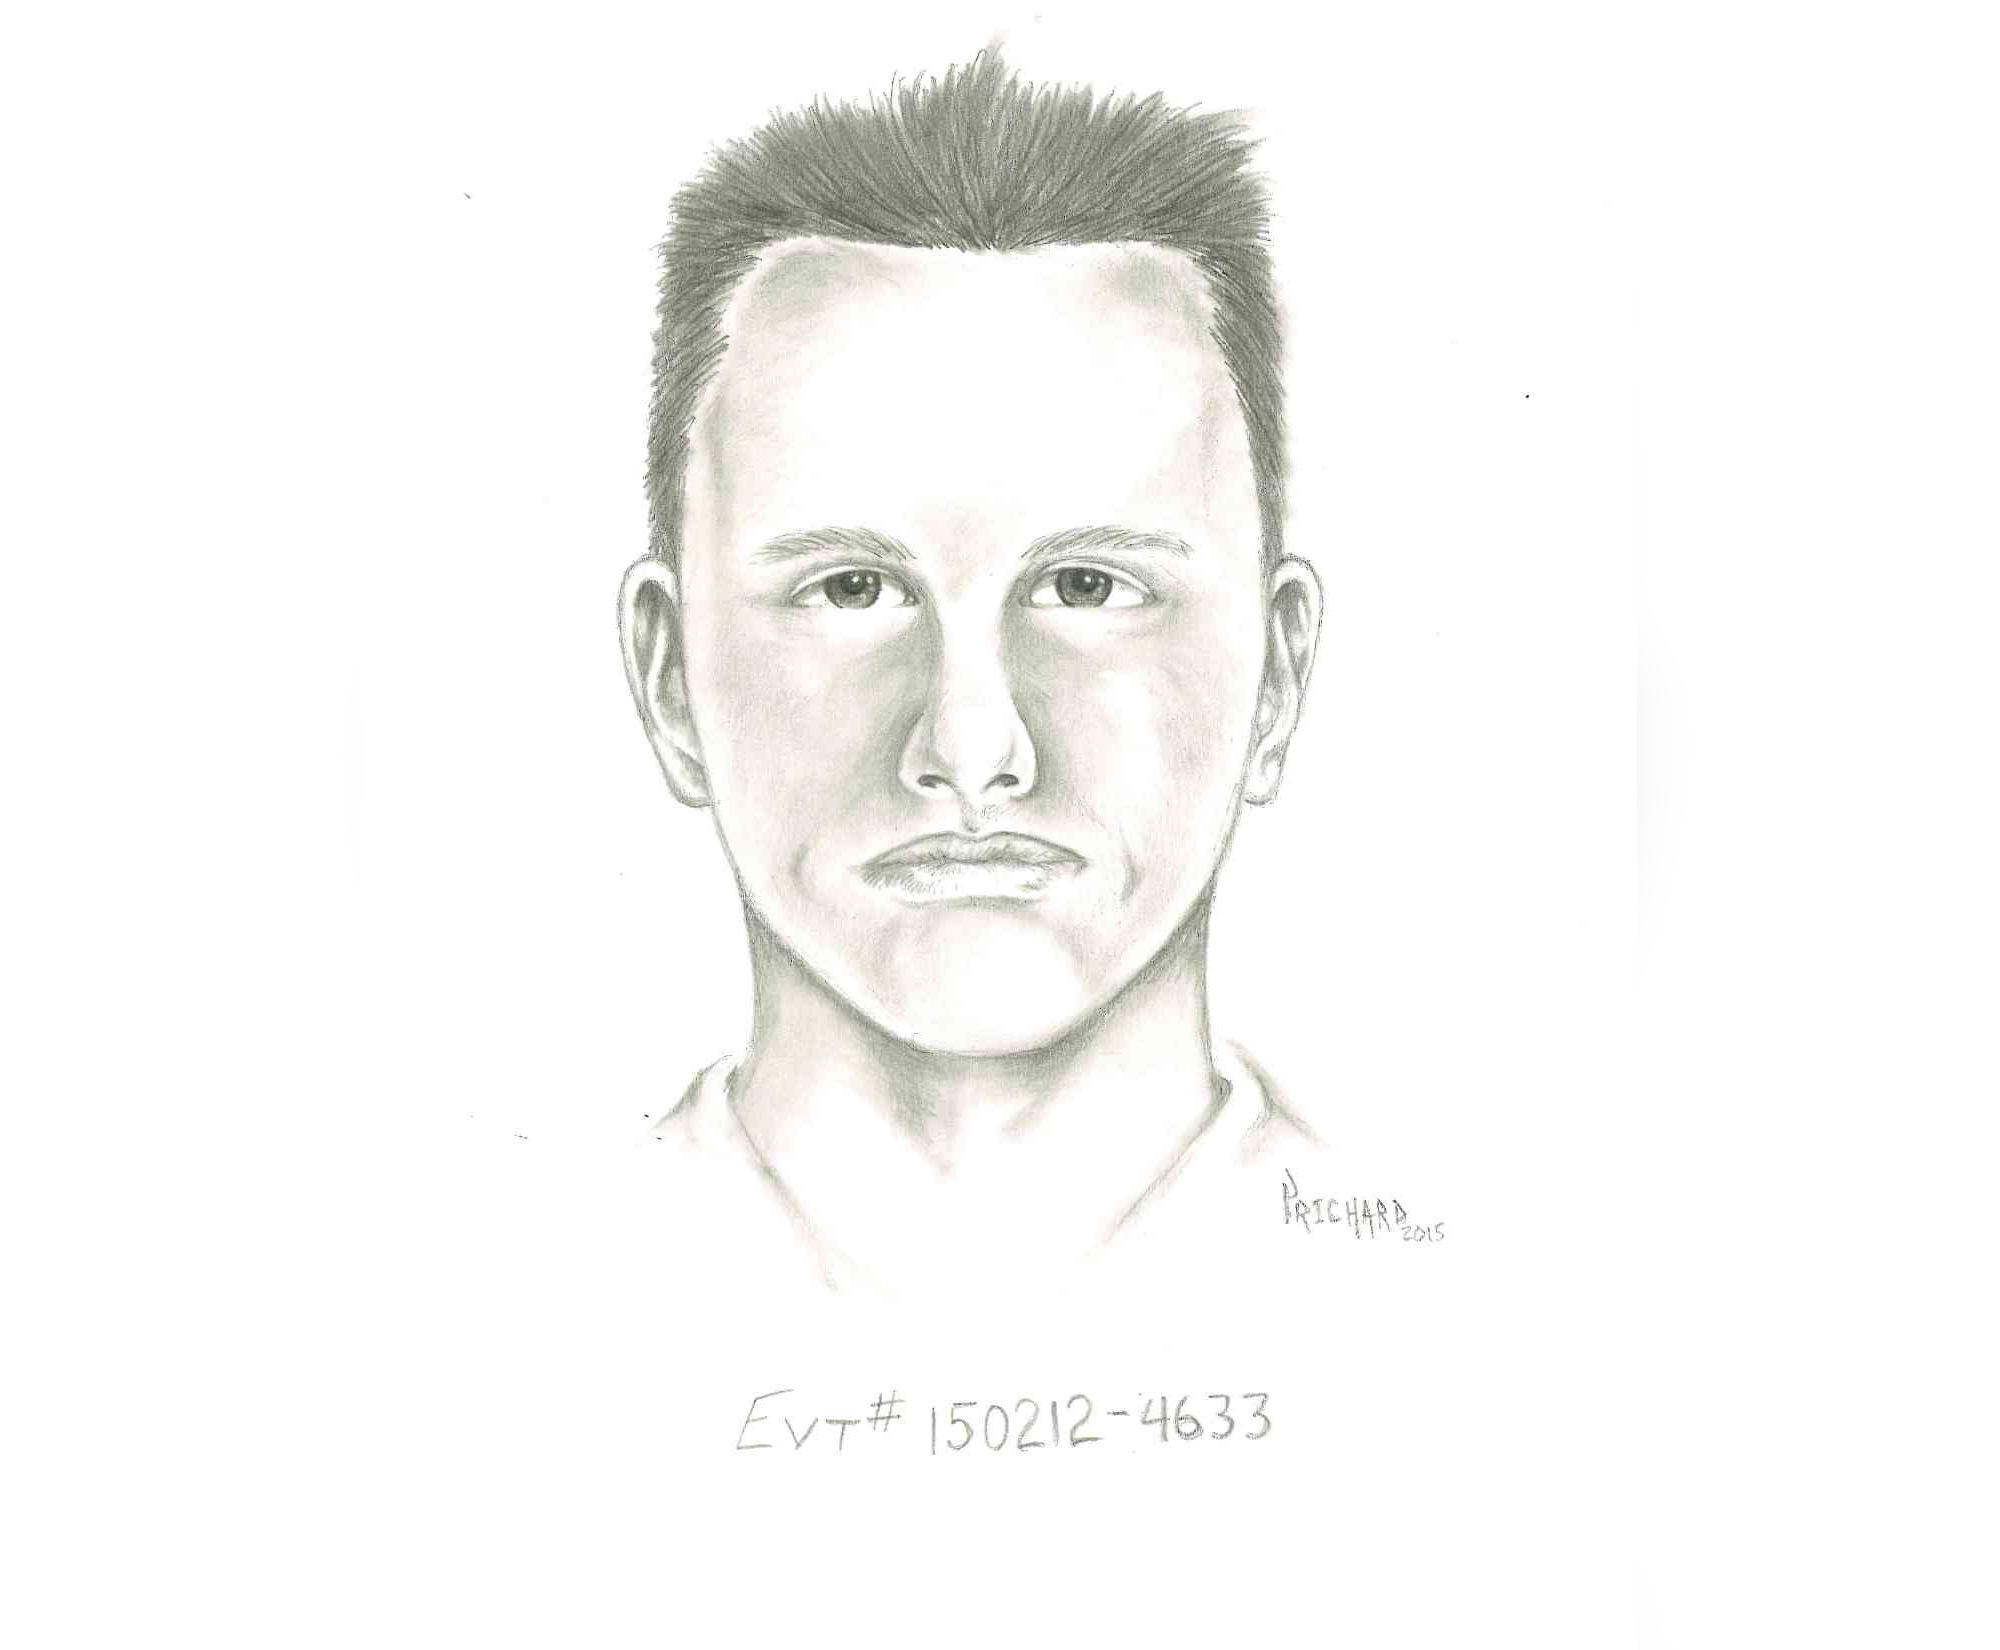 PHOTO: Las Vegas Metropolitan Police released this composite sketch of a subject involved in shooting on Feb 12 in Las Vegas.